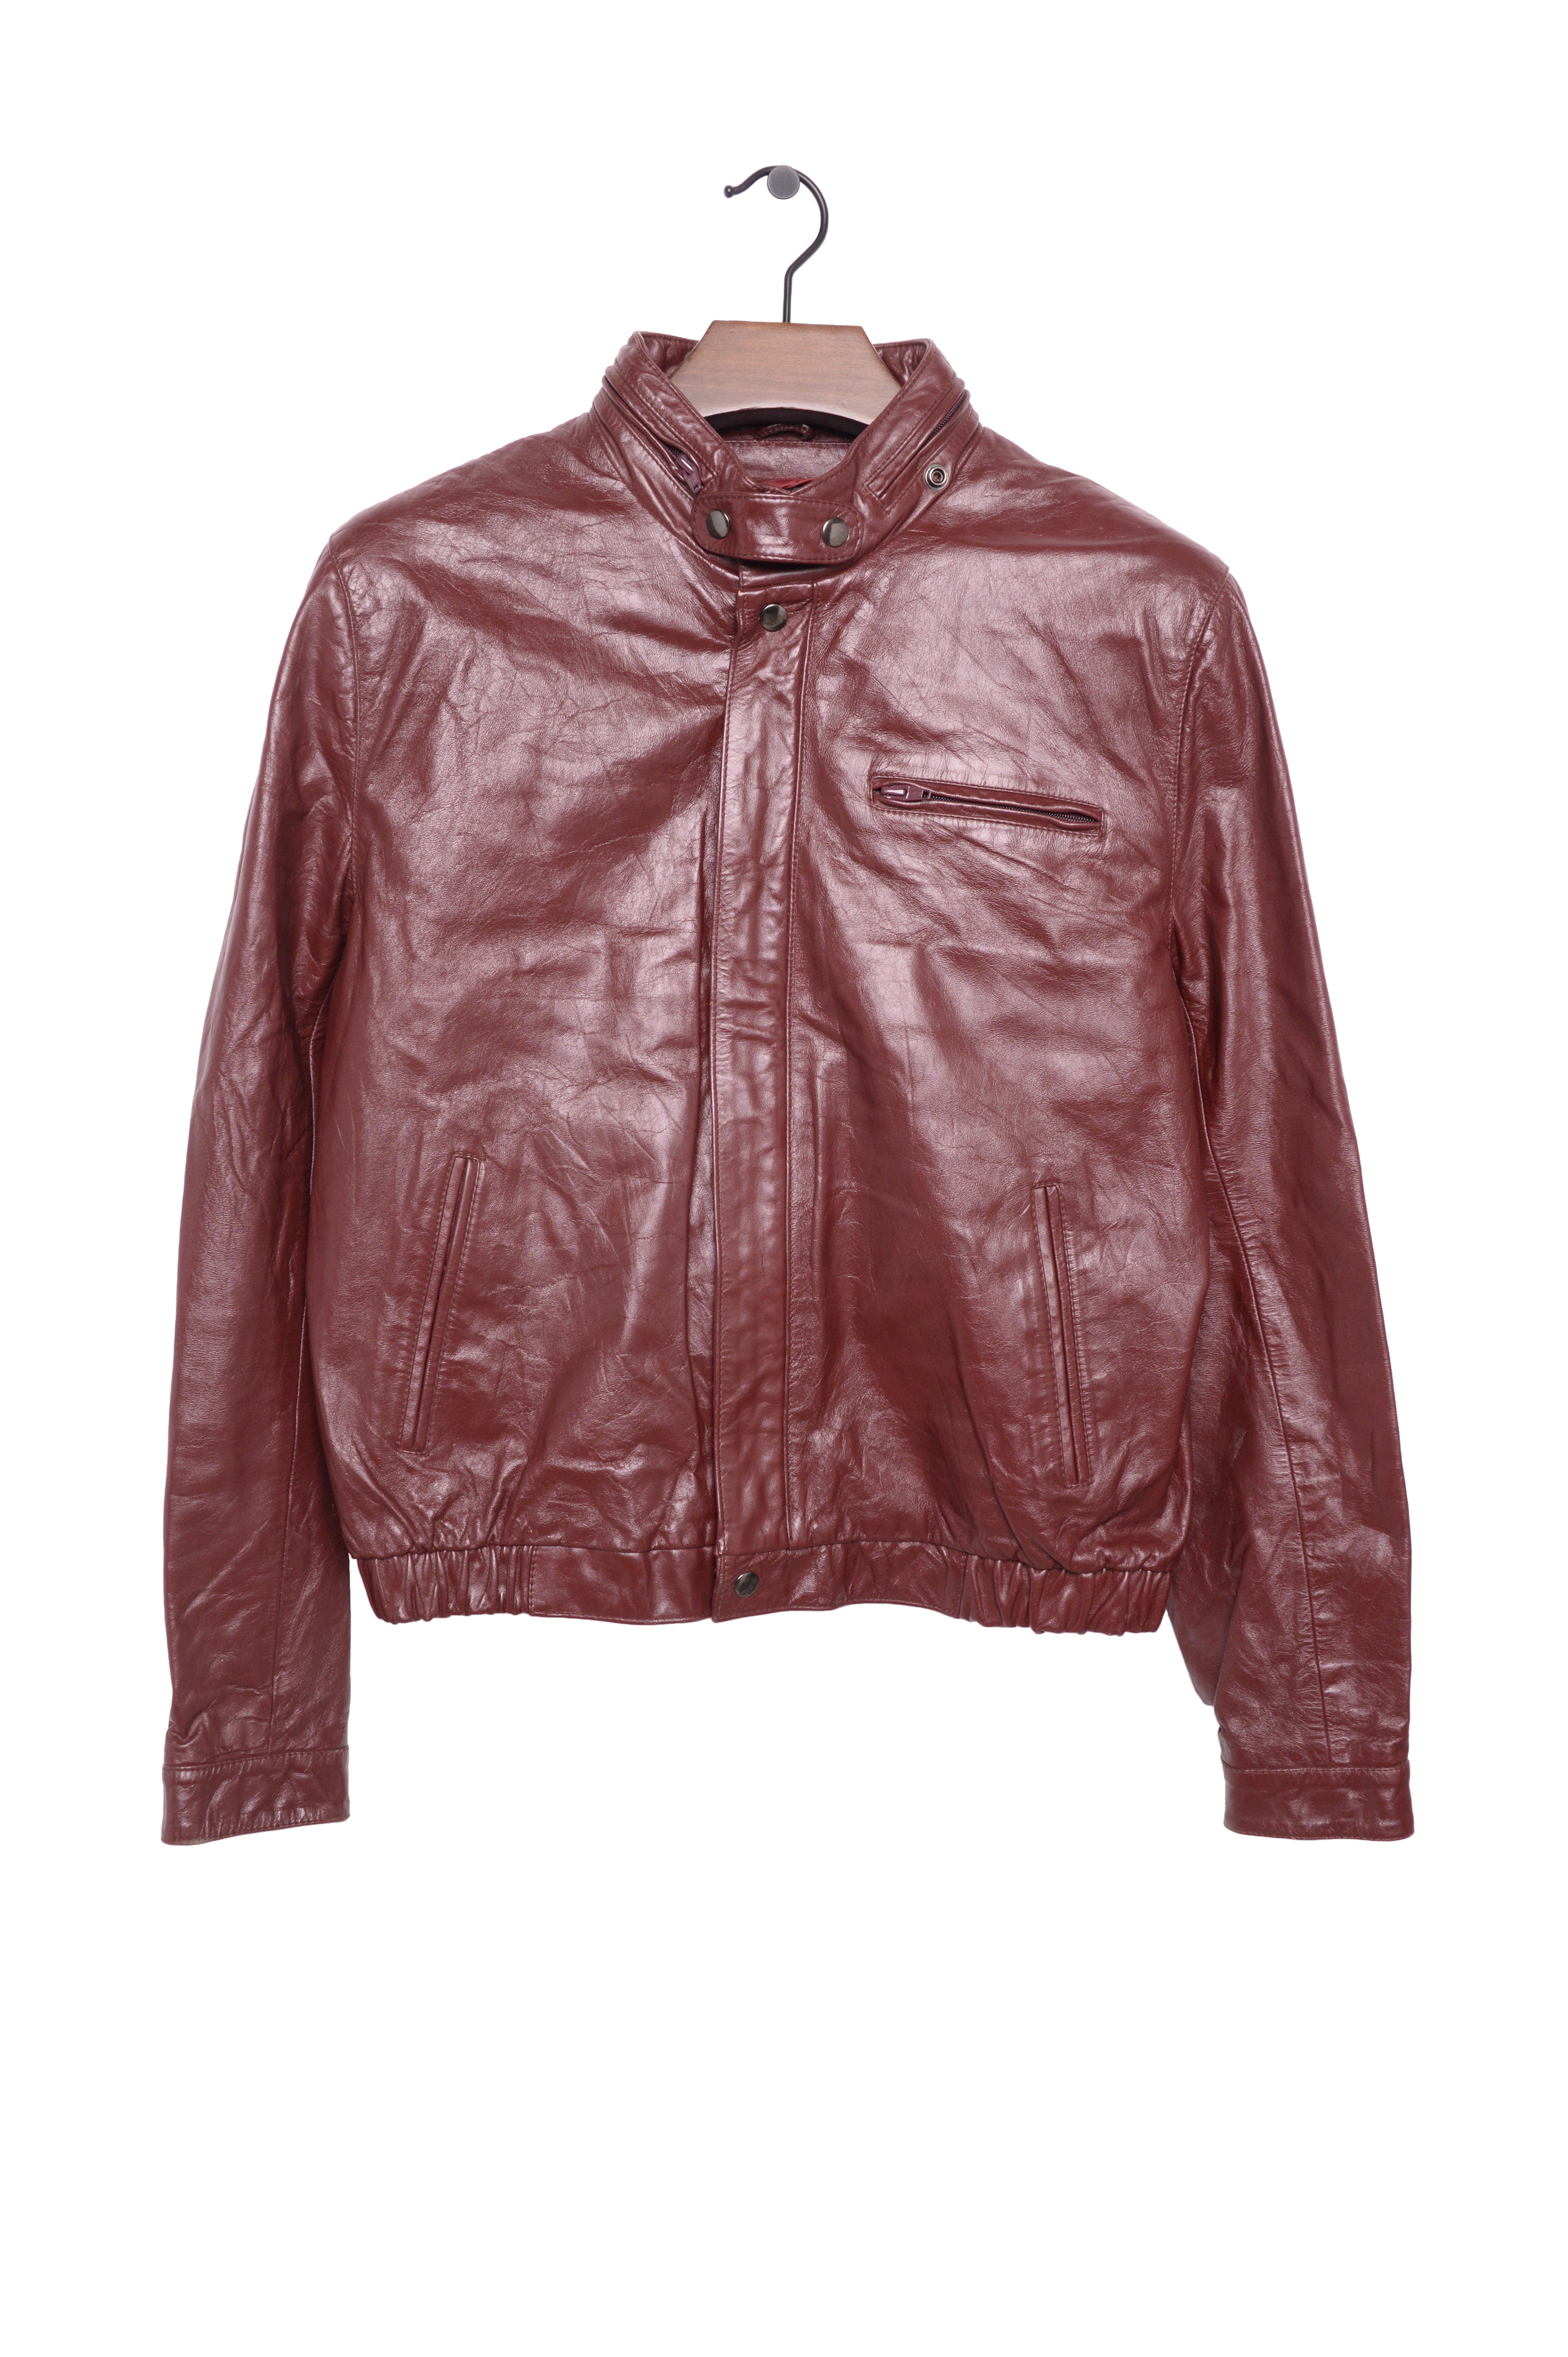 1980s Burgundy Leather Jacket Free Shipping - The Vintage Twin